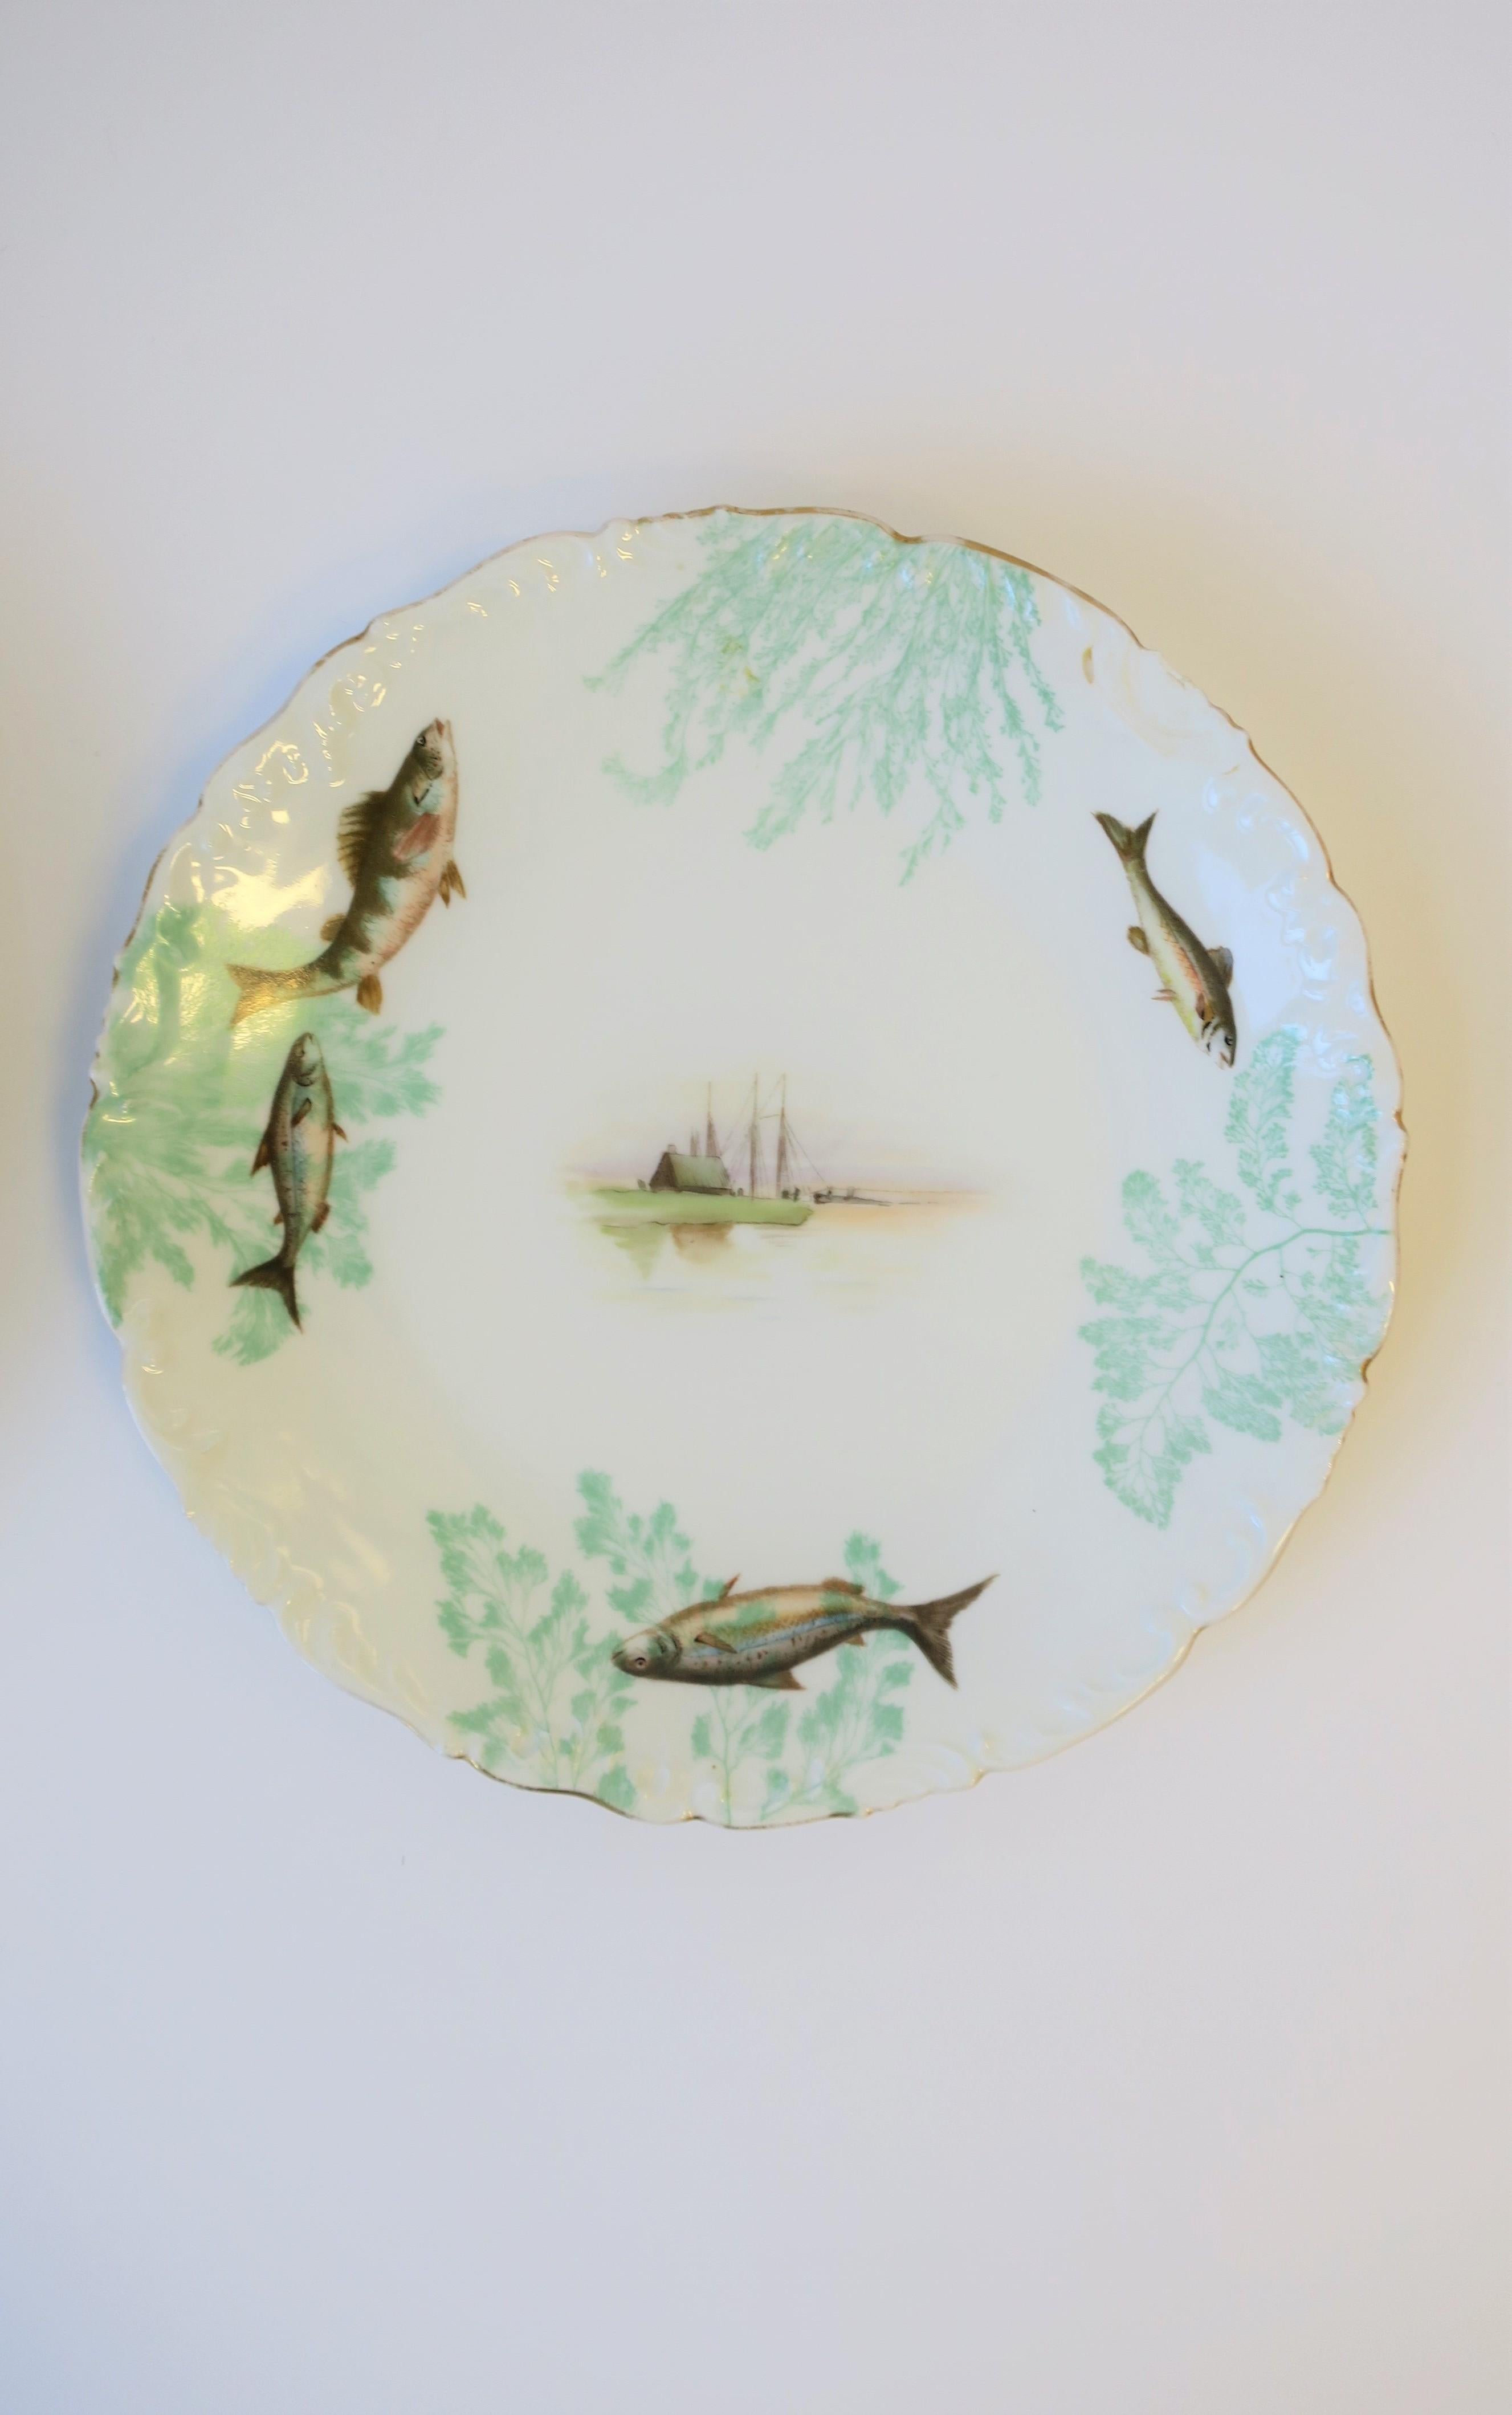 French Limoges Porcelain Dinner Plates with Rustic Fish & Boat Design, Set of 8 For Sale 3